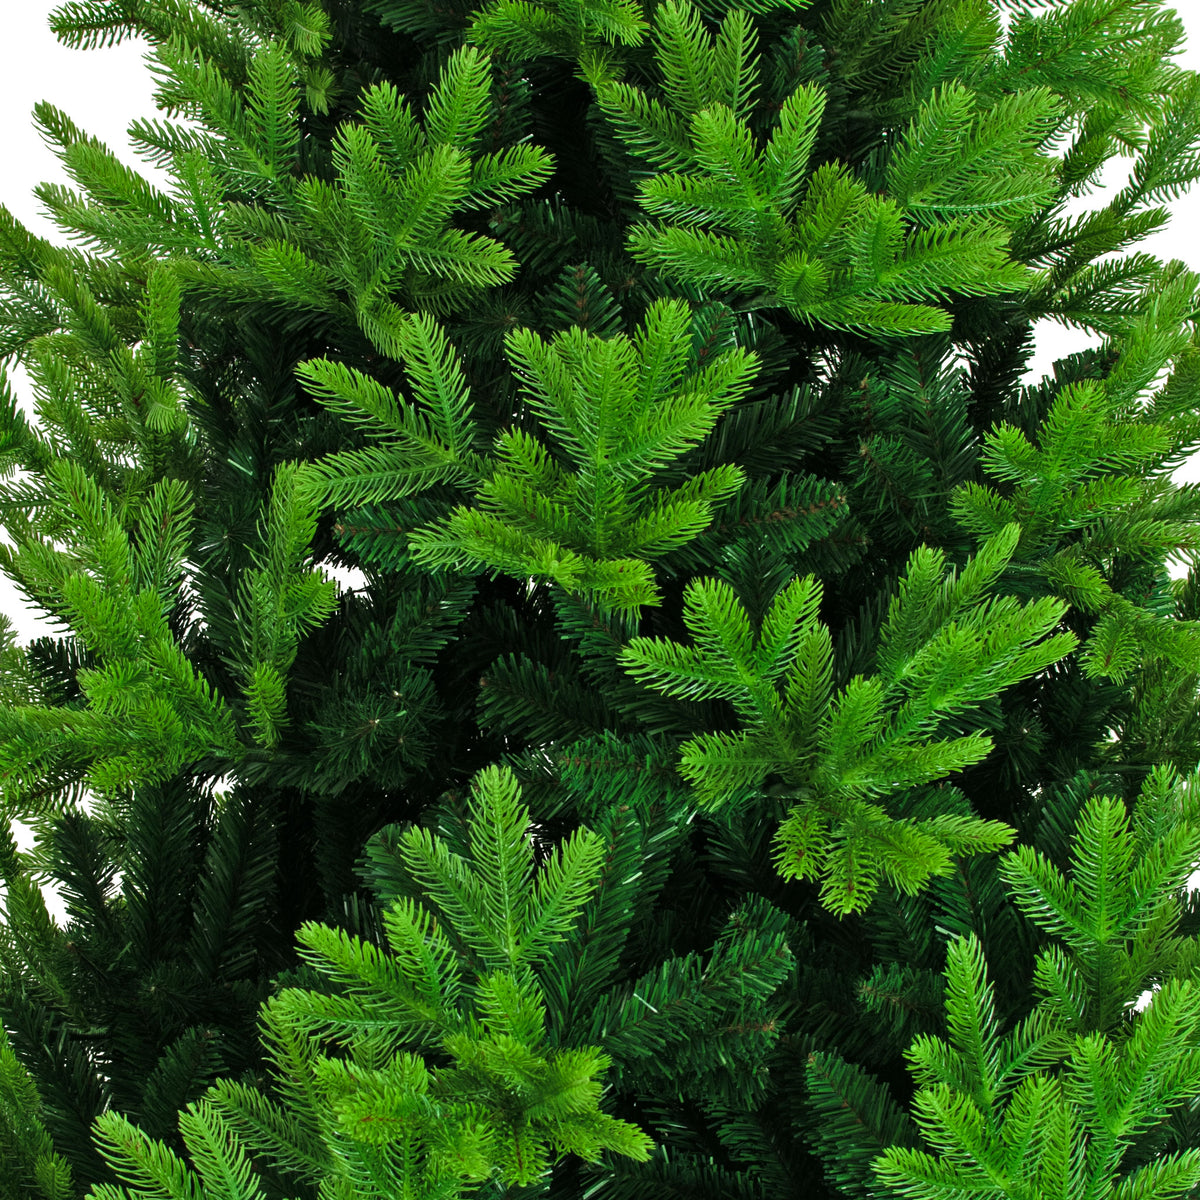 Norway Spruce Christmas Tree is made with artificial spruce and pine needle brush